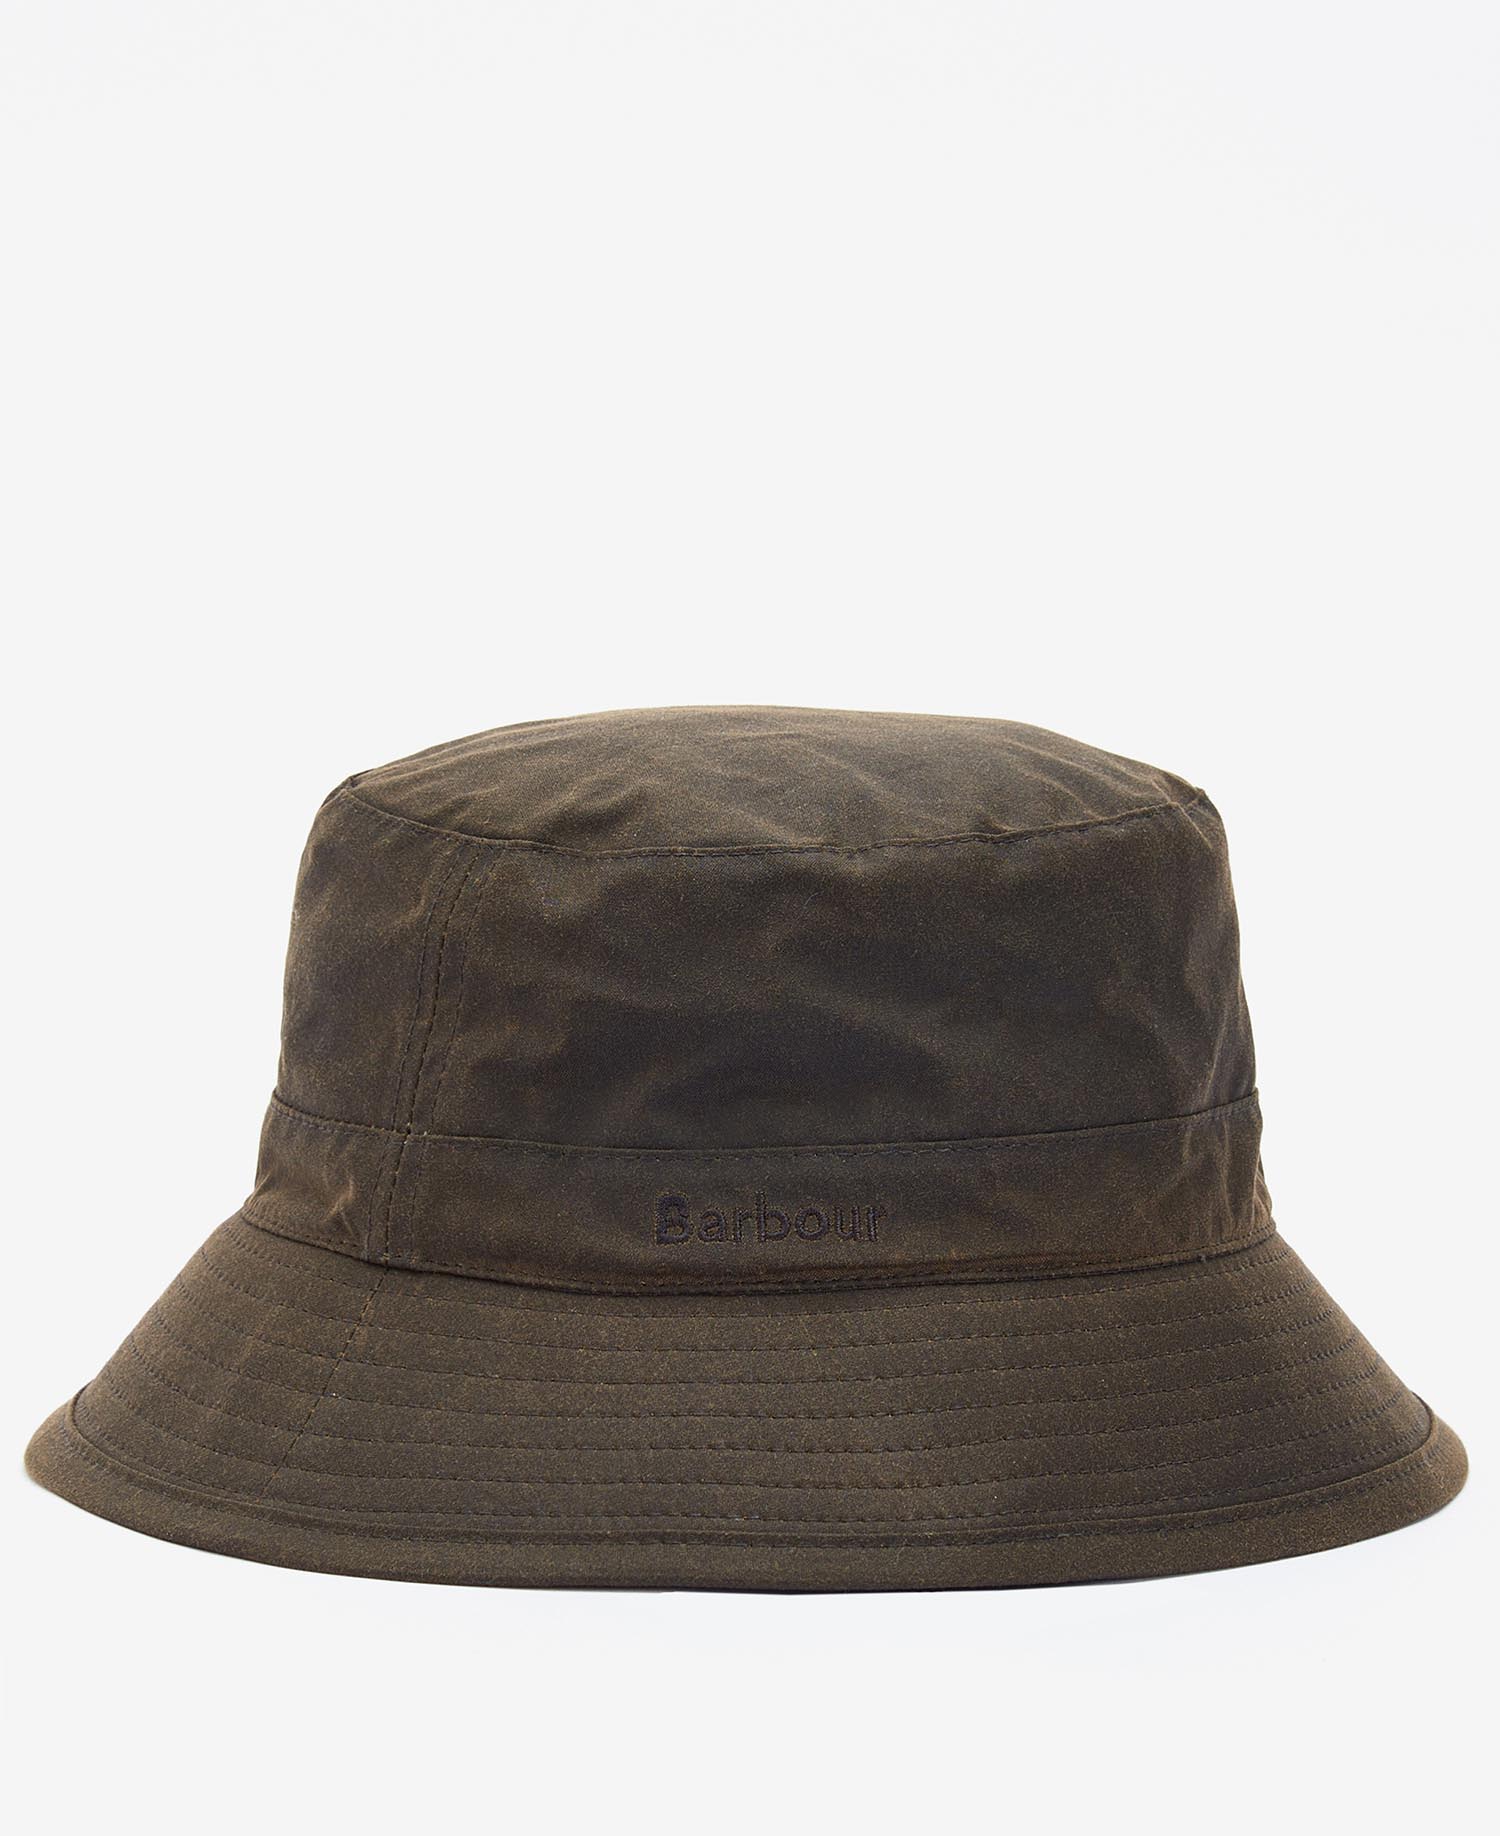 Barbour Wax Sports Hat in Olive